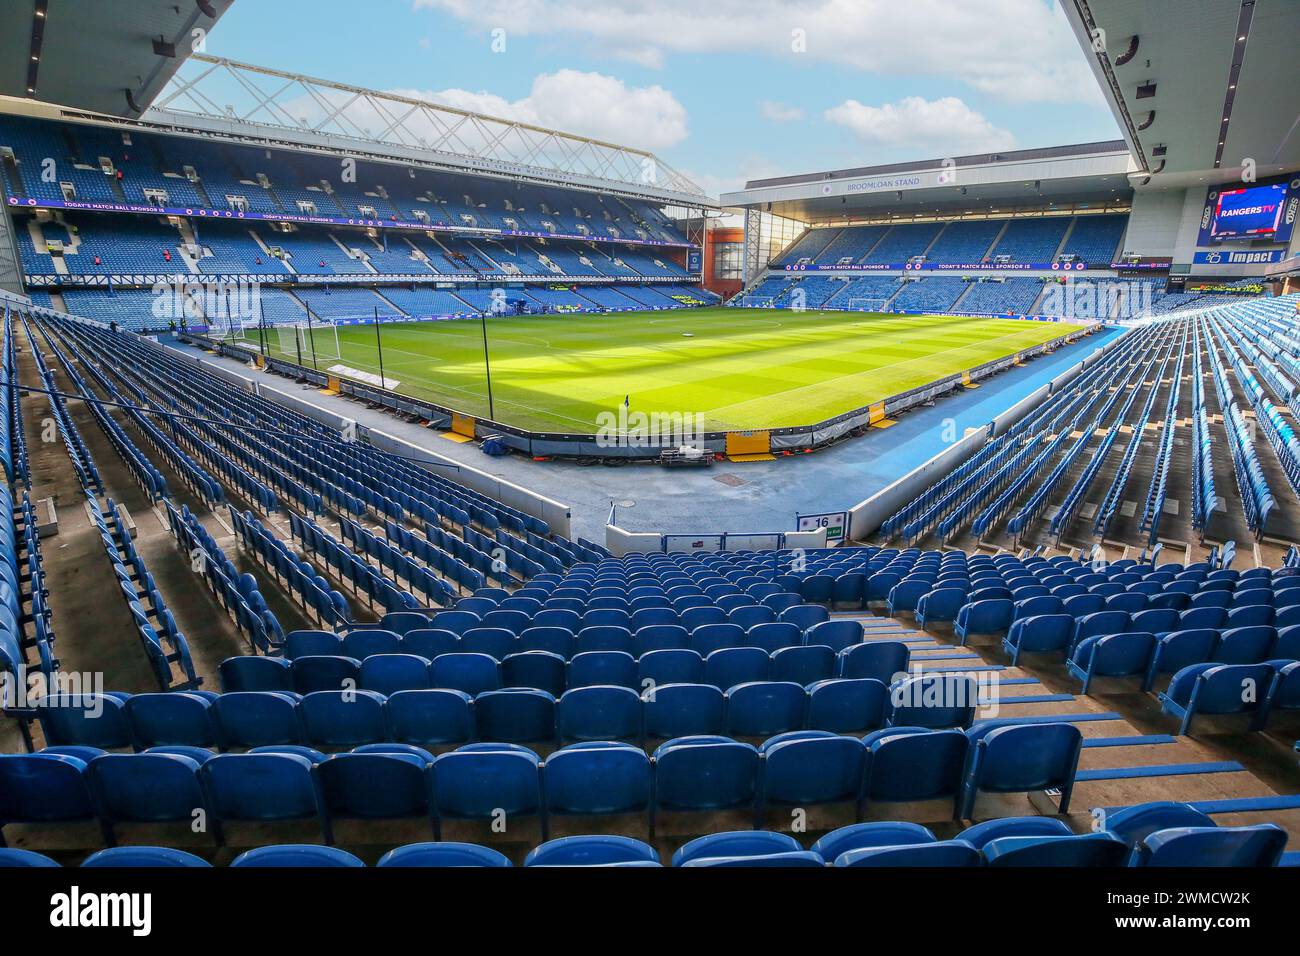 Playing pitch and spectator stands inside Ibrox Stadium, home ground of Rangers Football Club, Glasgow, Scotland, UK Stock Photo